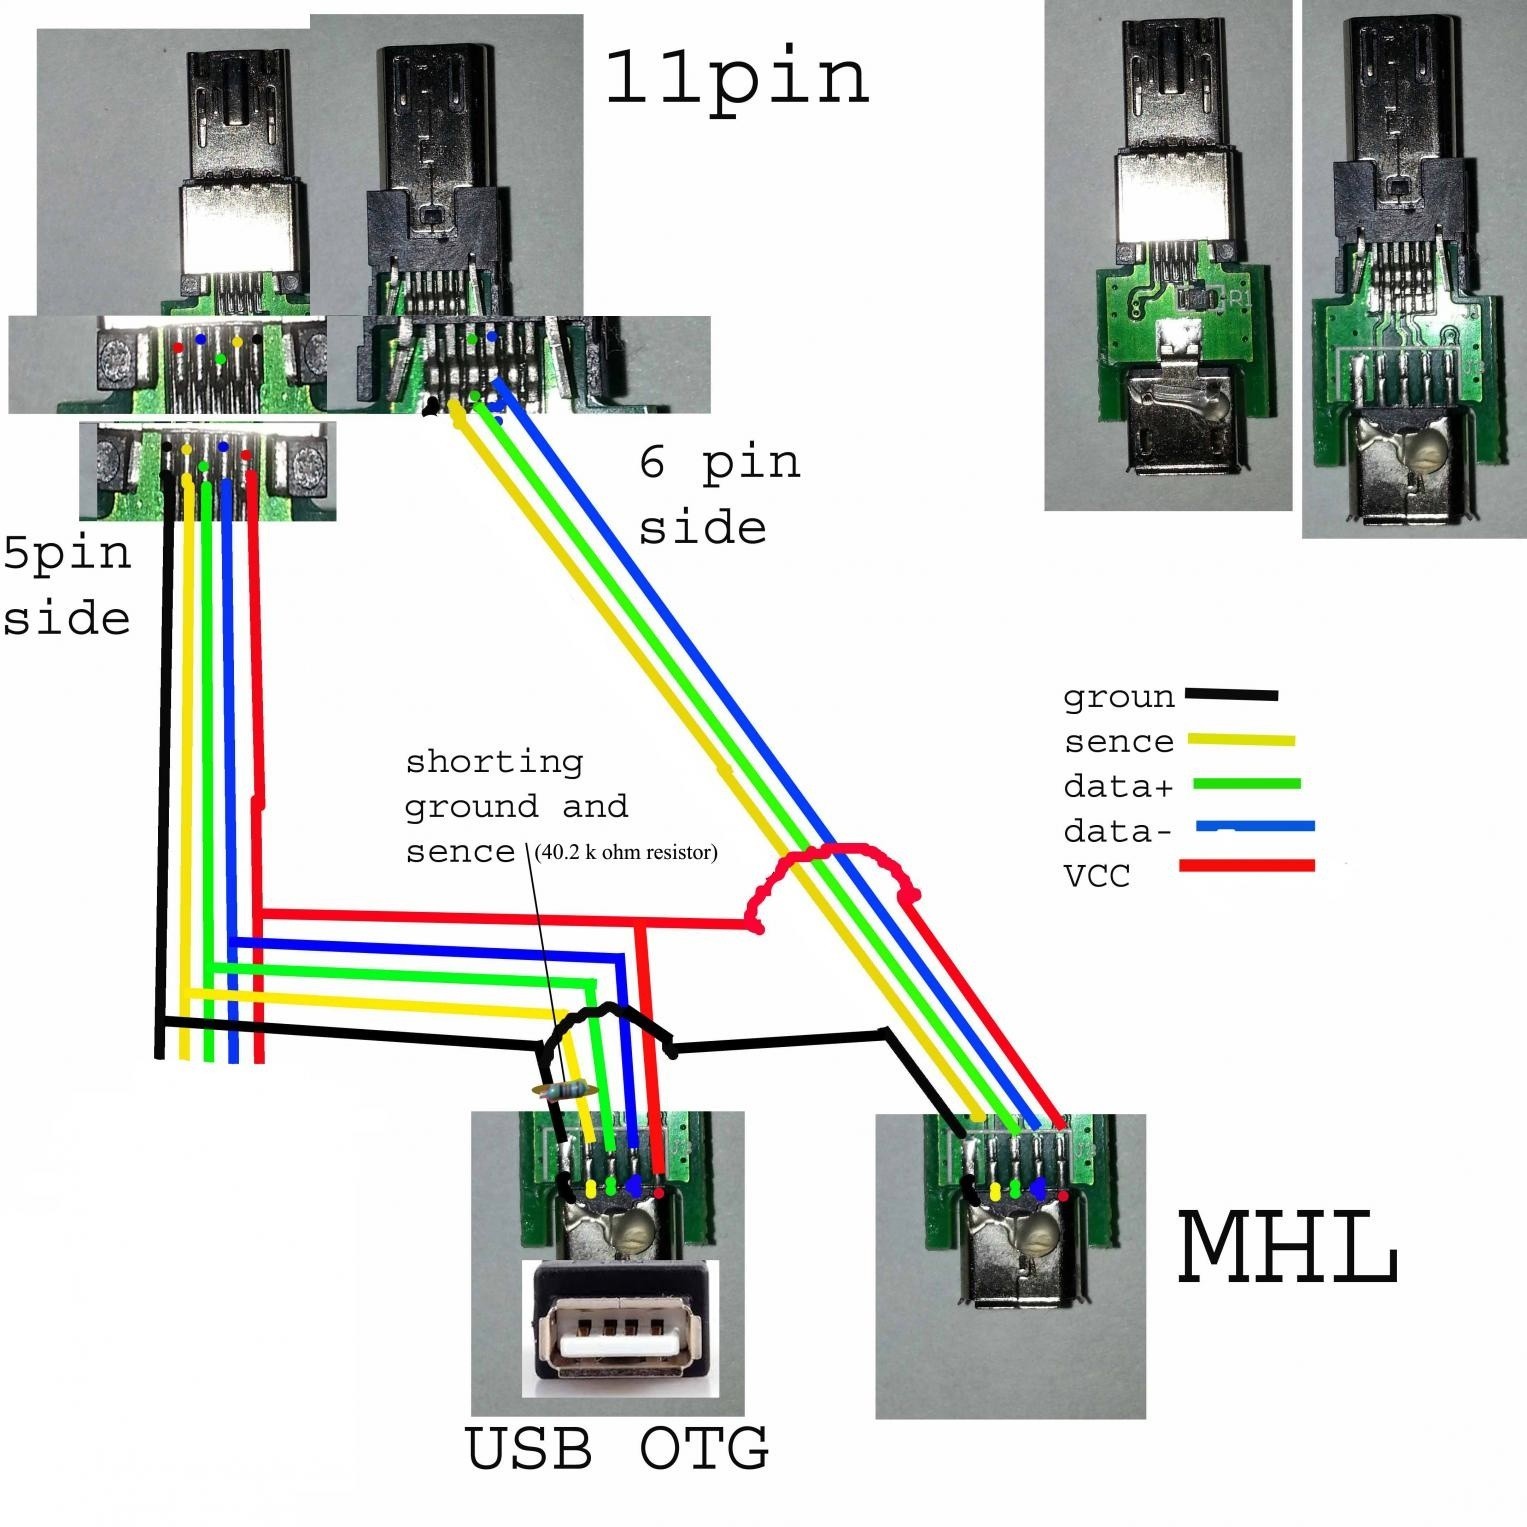 Dorable Hdmi Cable Wiring Diagram Mold Simple Wiring Diagram Hdmi To posite Wiring Diagram Hdmi To Usb Cable Wiring Diagram